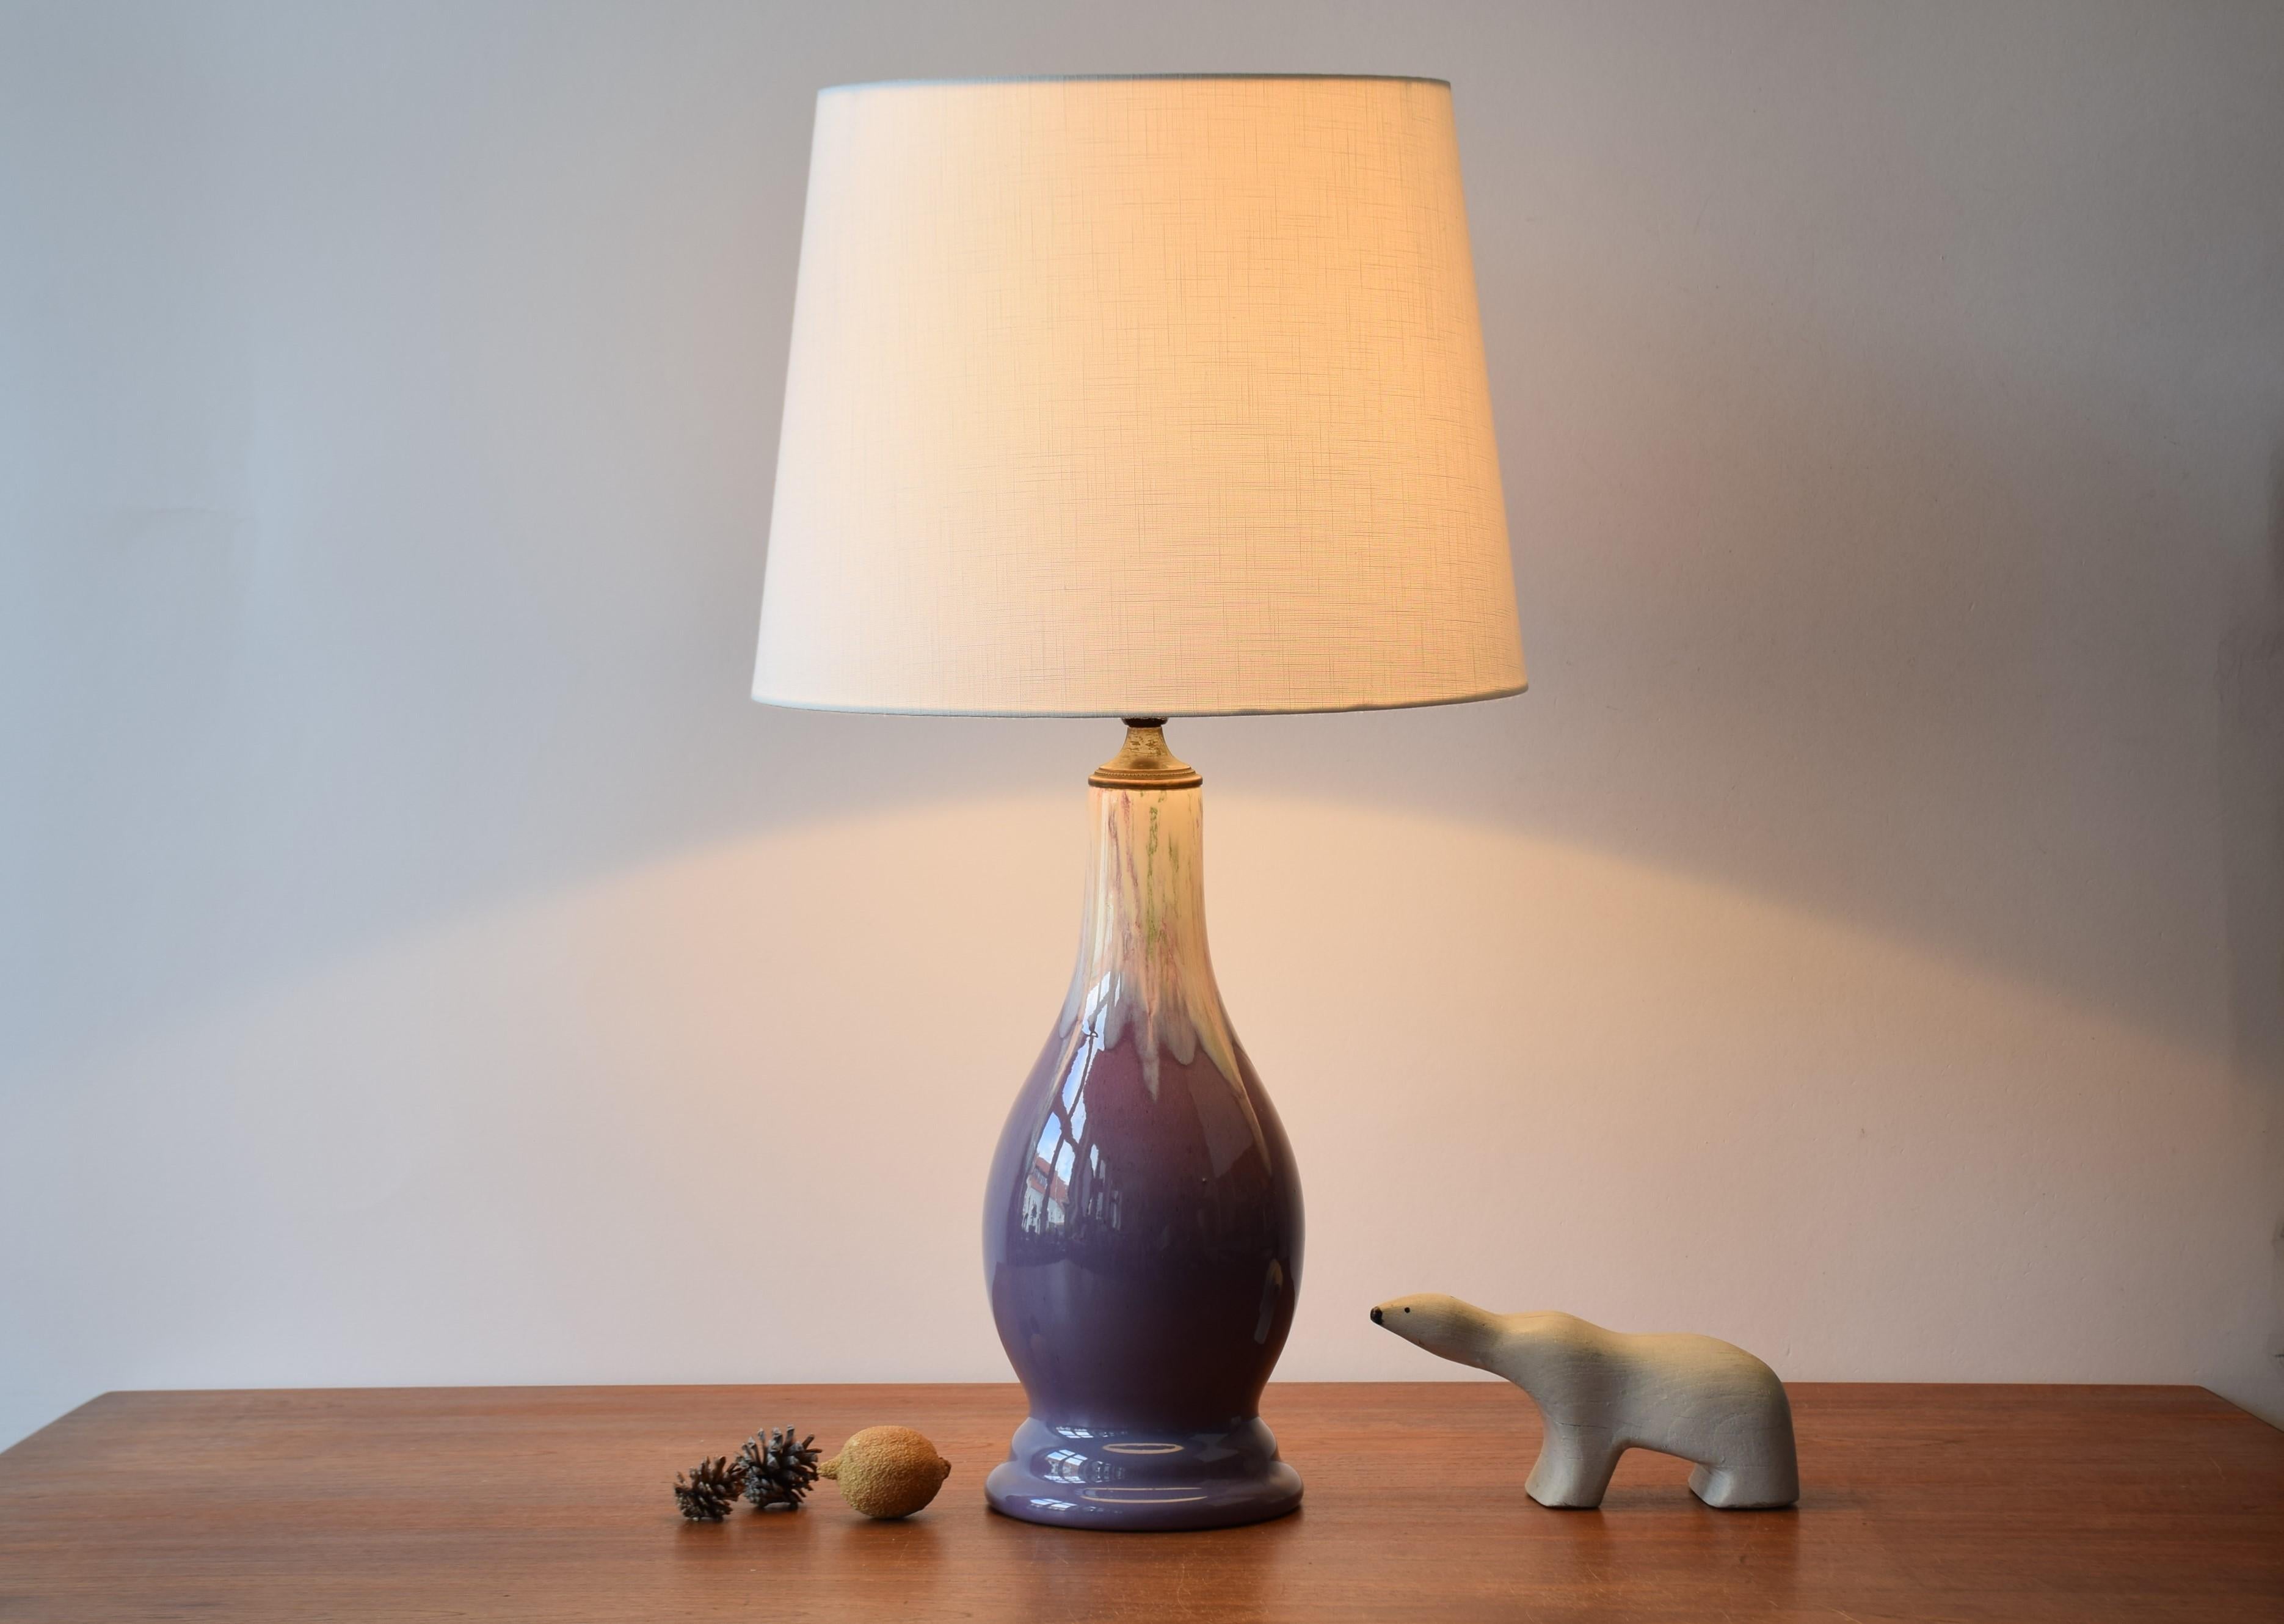 Here is a tall ceramic table lamp from Michael Andersen & Søn (MA&S). It is in the Danish Art Nouveau style called 